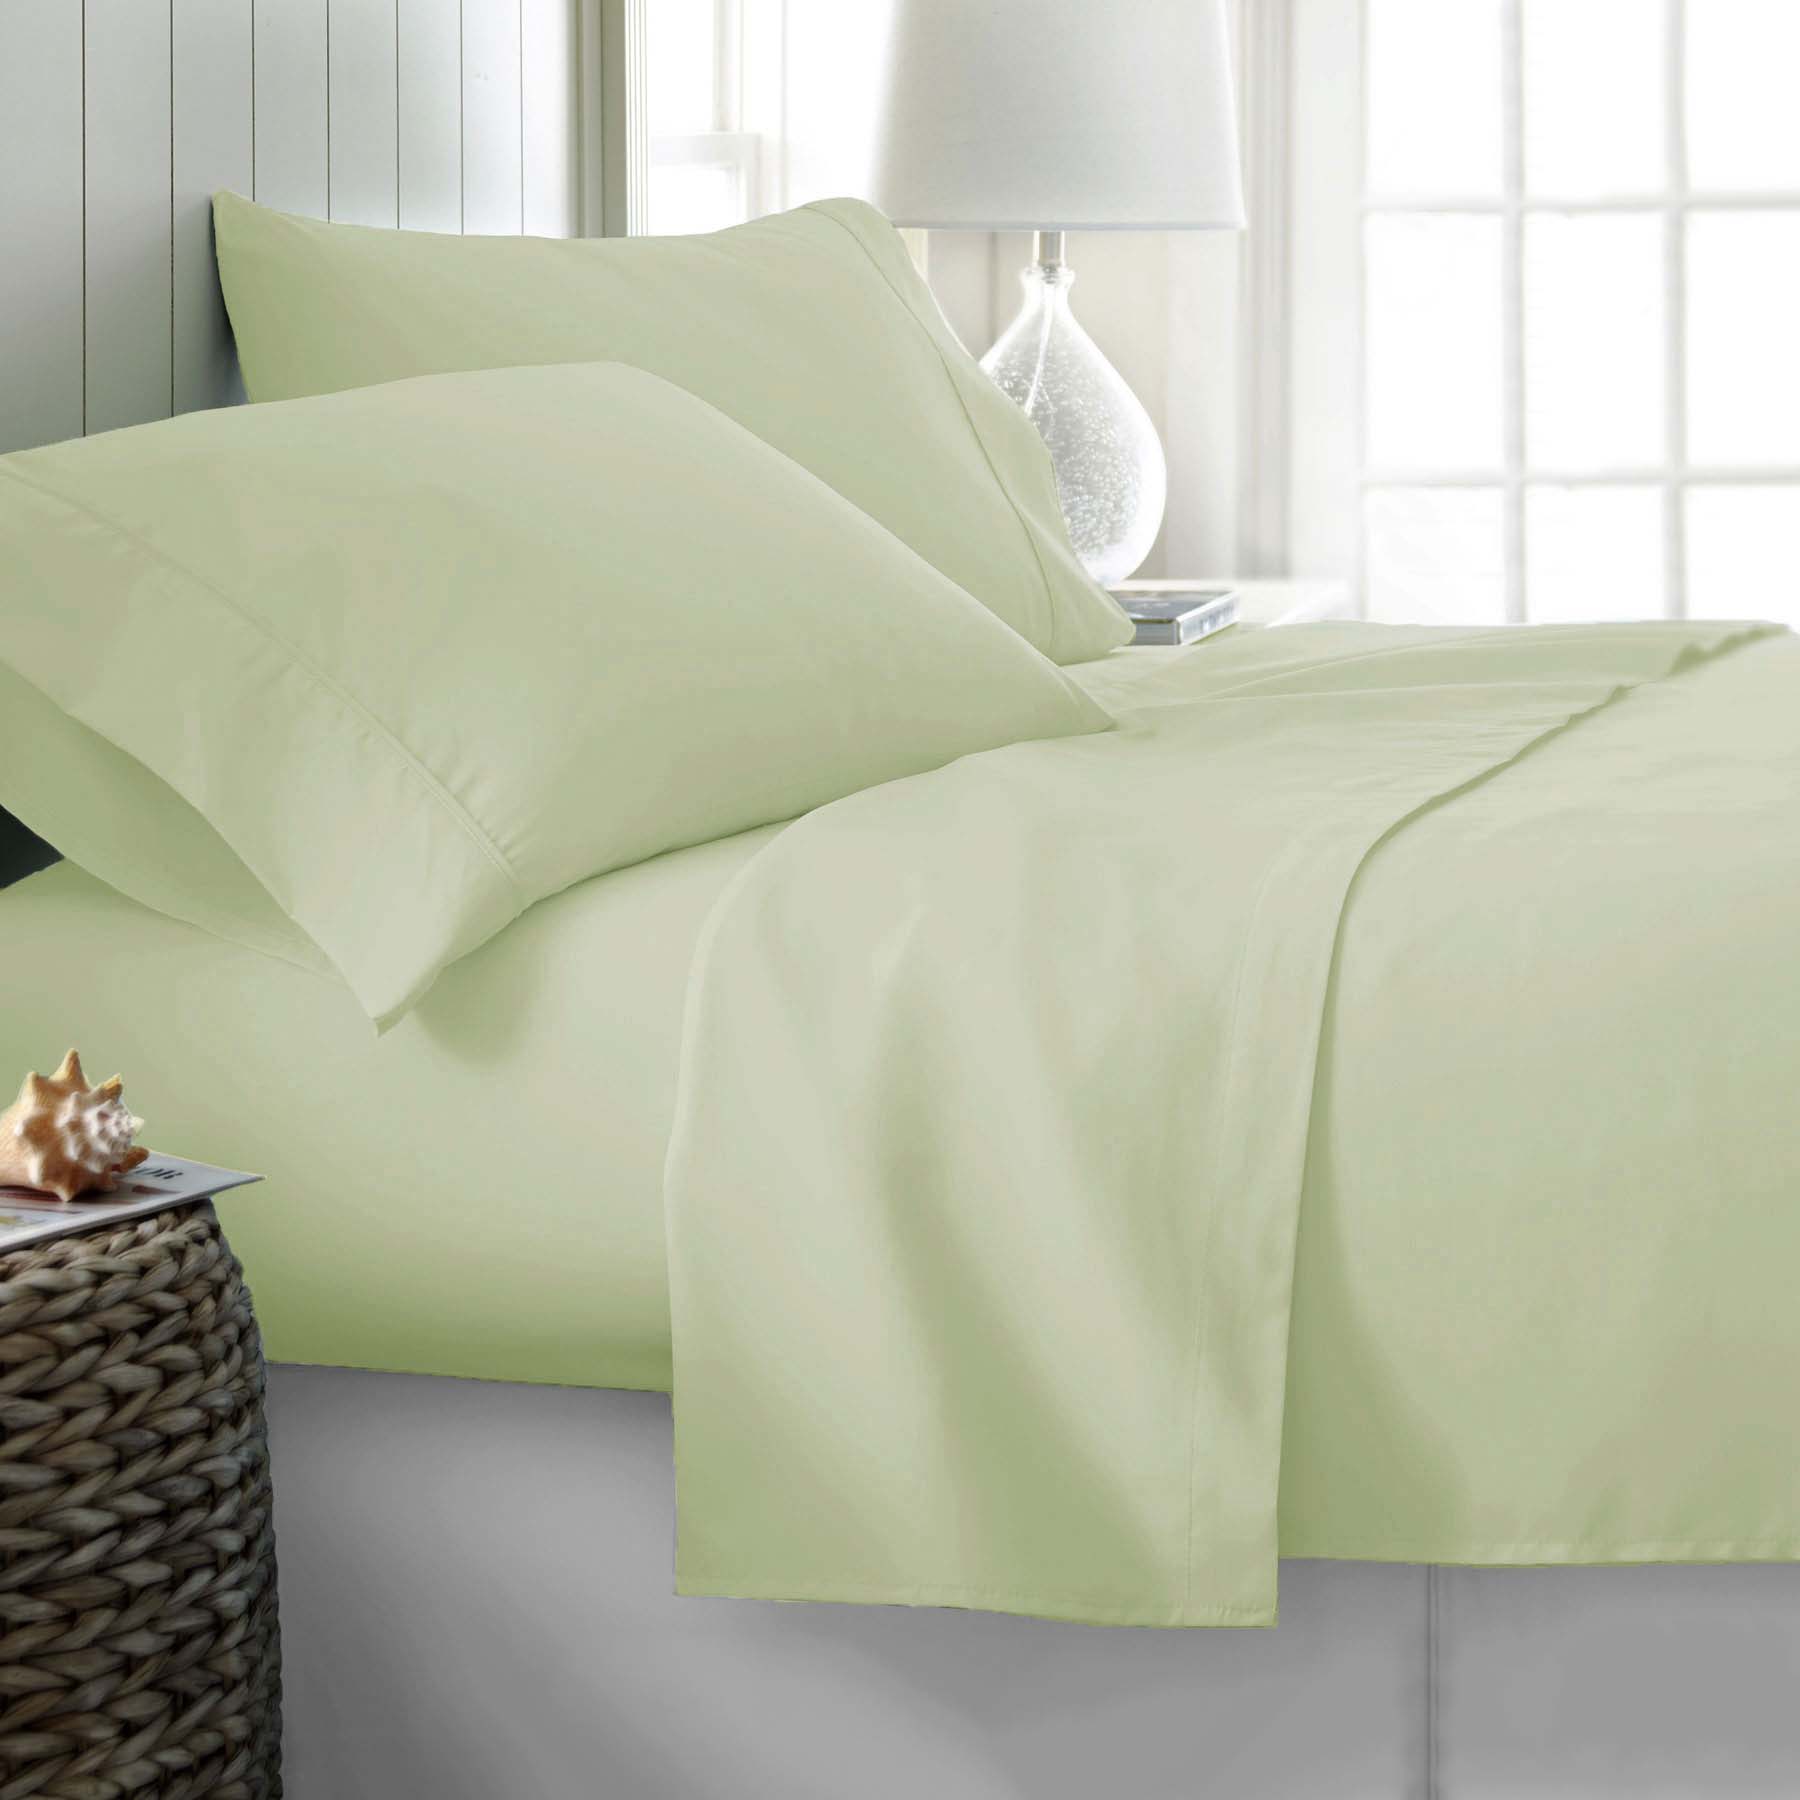 400TC Cotton Sateen Sheet Set Queen - Ivory (with a Hint of Green)